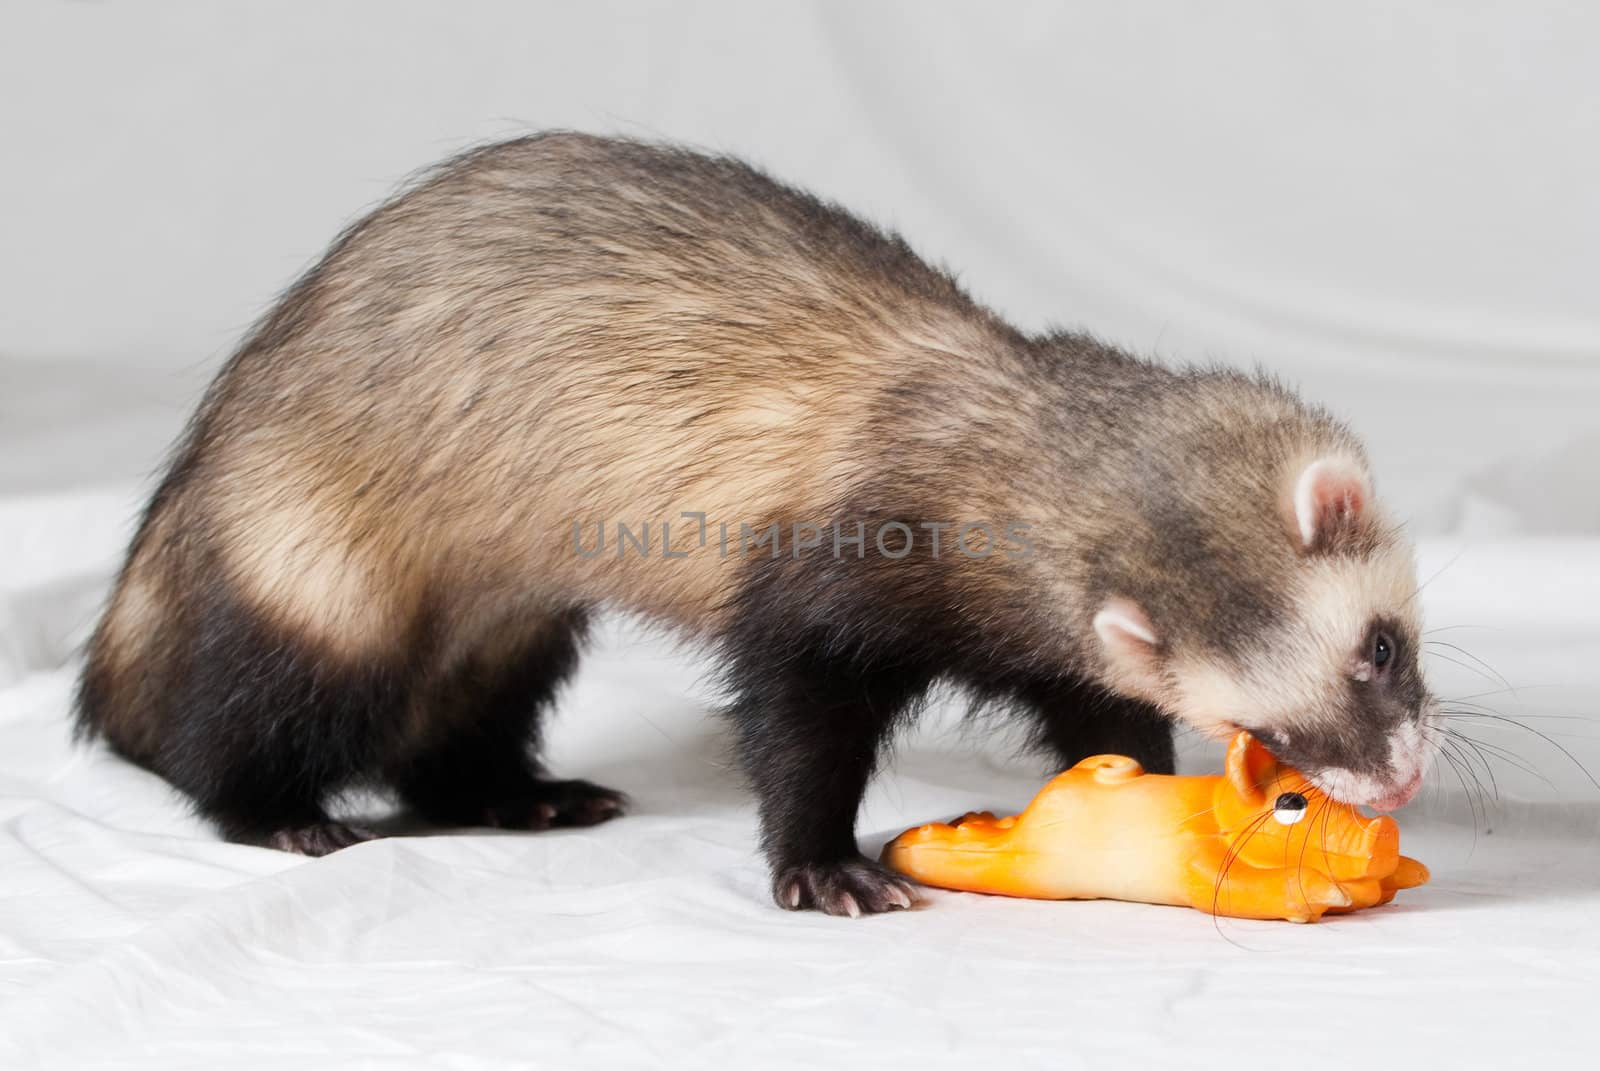 Polecat shoot made in studio on white background